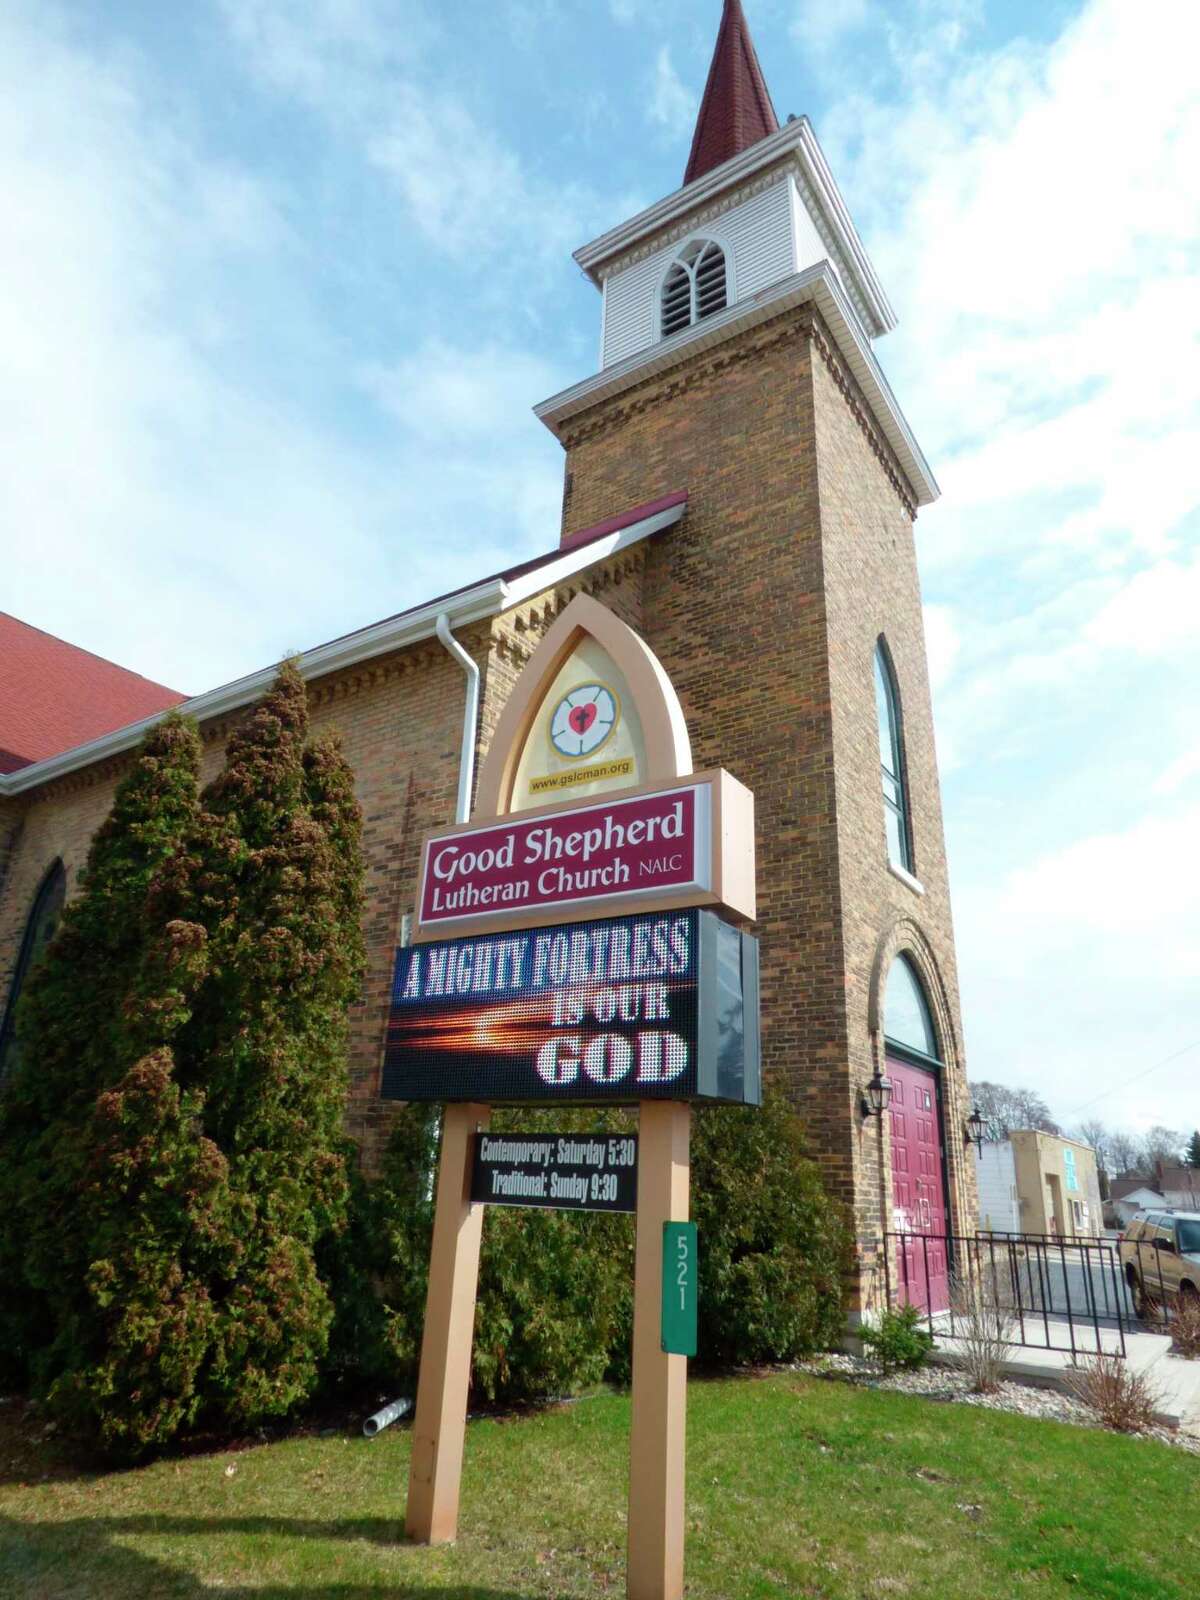 The Good Shepherd Evangelical Lutheran Church of Manistee has made a $100,000 donation to the Armory Youth Project to be spread over five years.